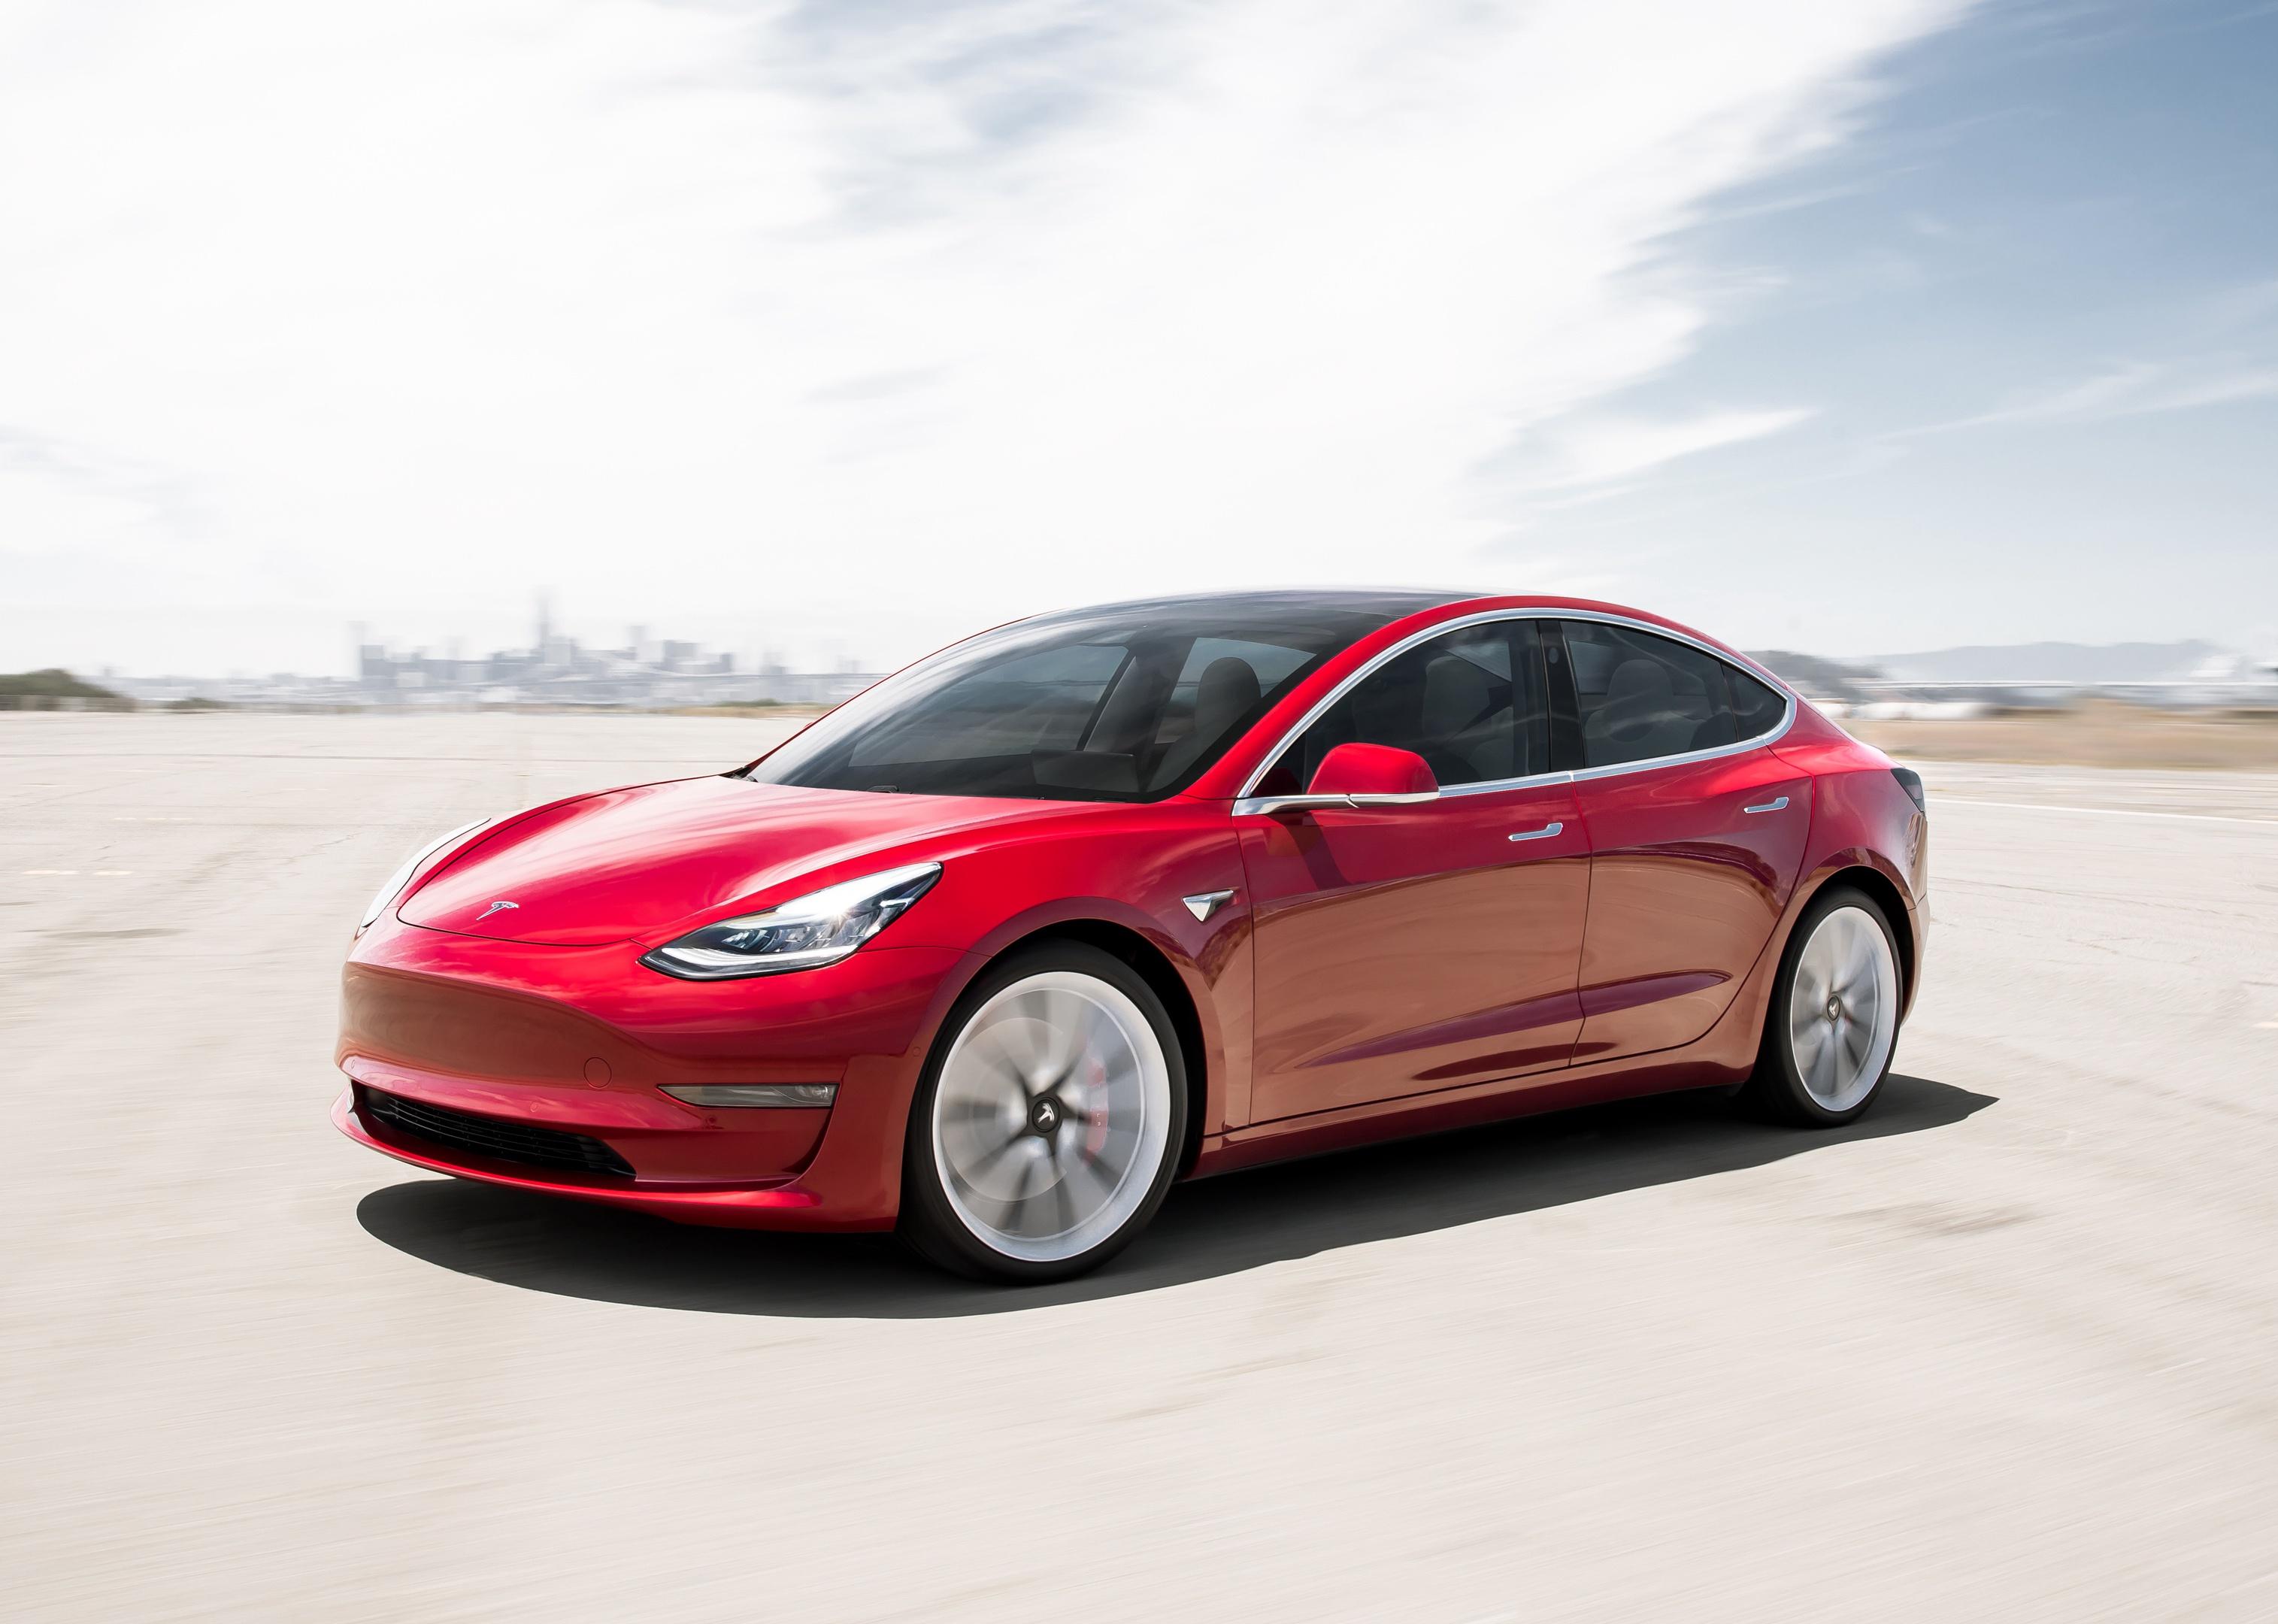 A red Tesla Model 3 in front of a distant city.